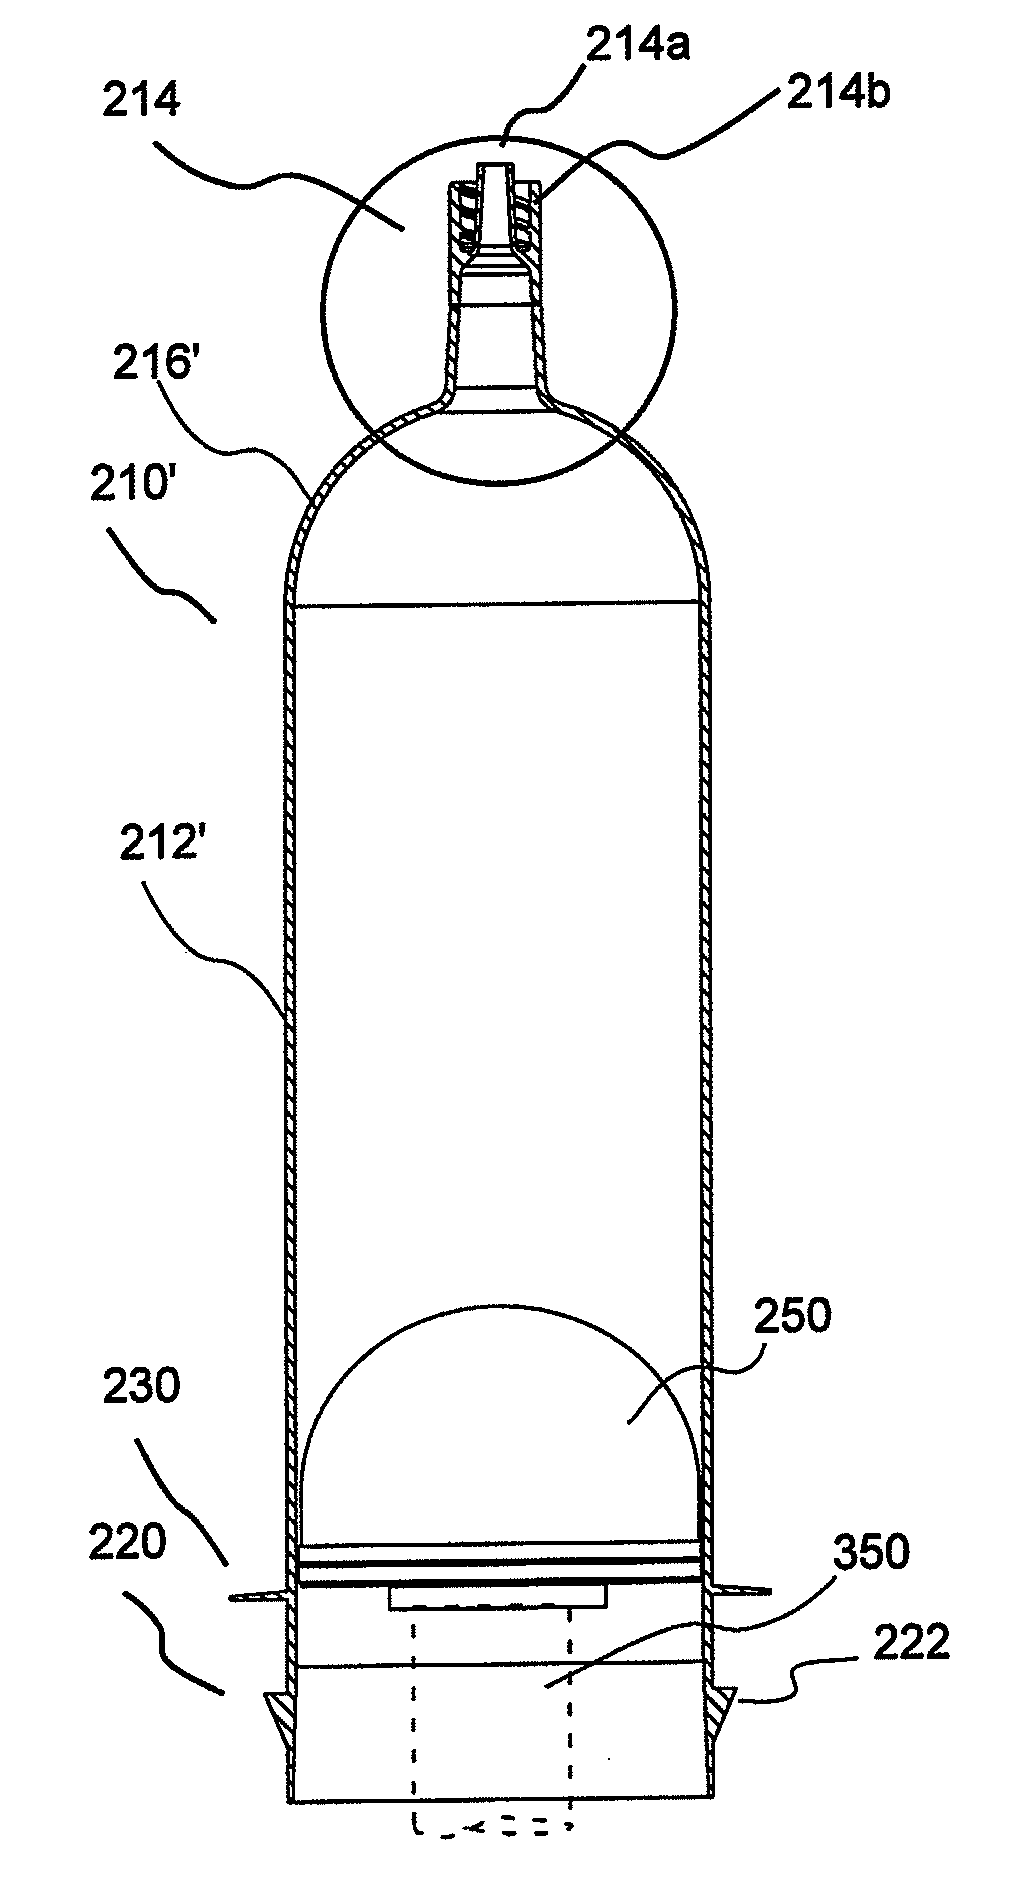 Method of manufacturing syringes and other devices